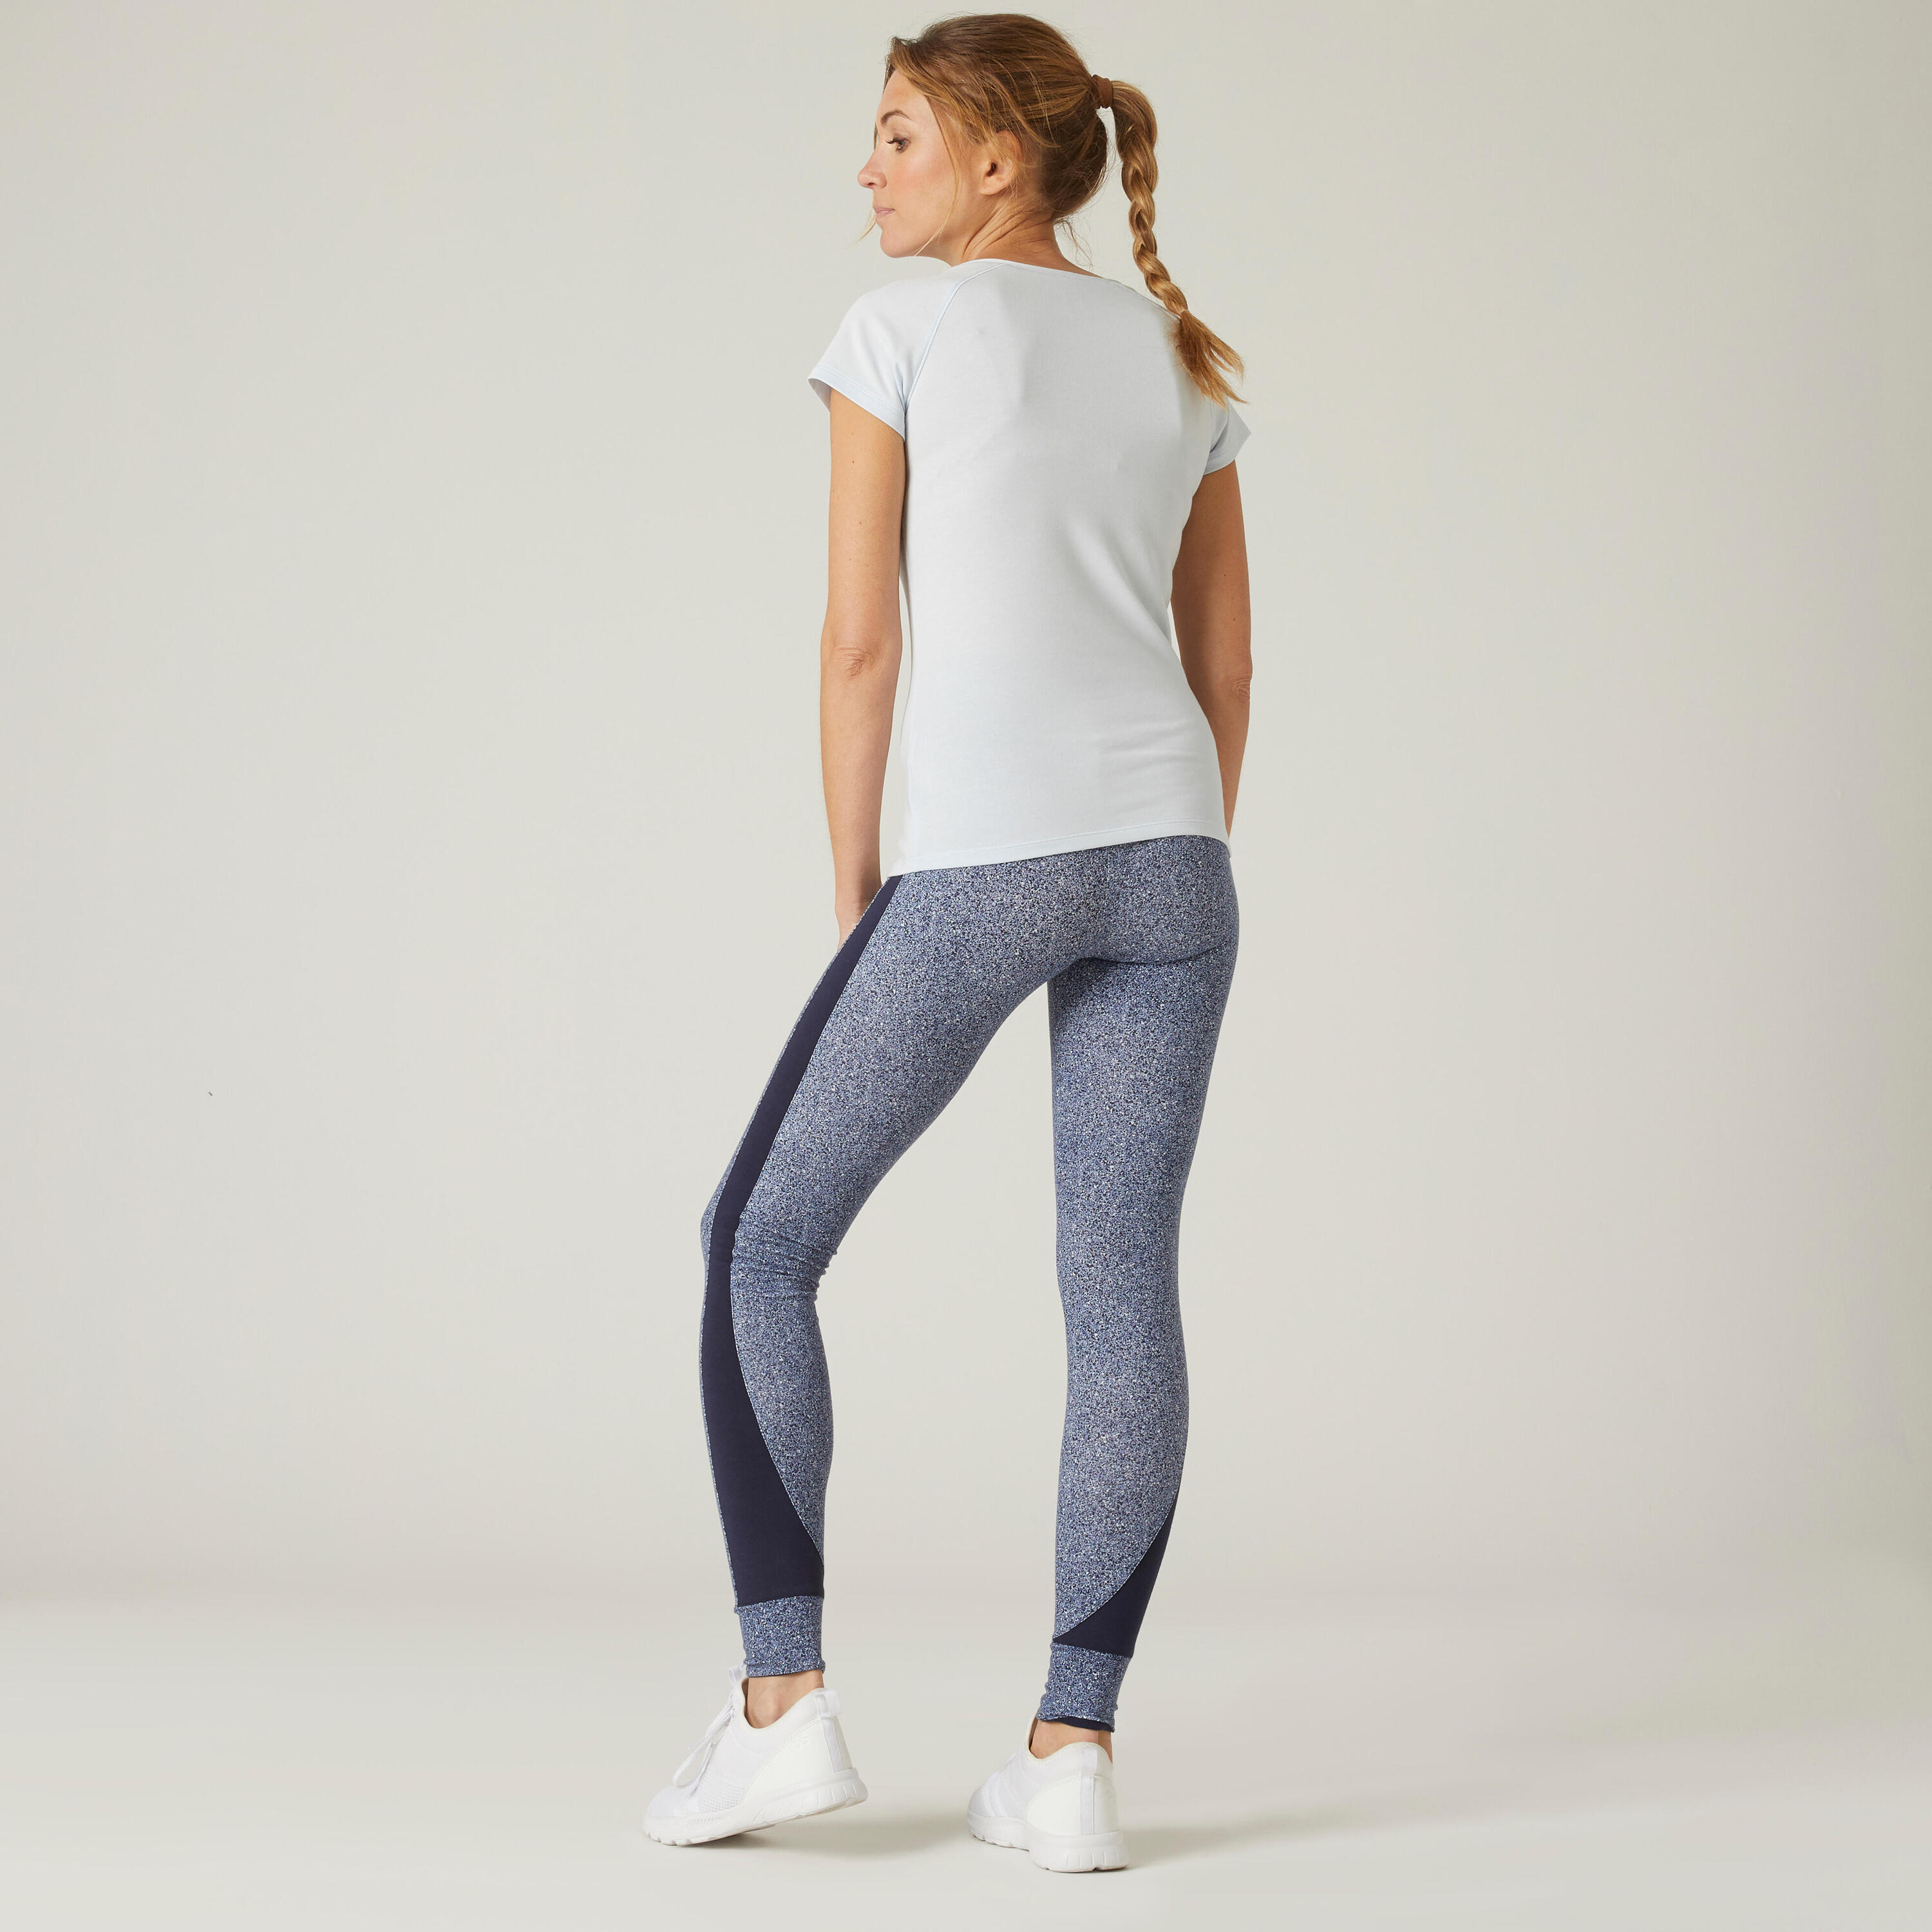 Stretchy High-Waisted Cotton Fitness Leggings - Blue Print 2/6